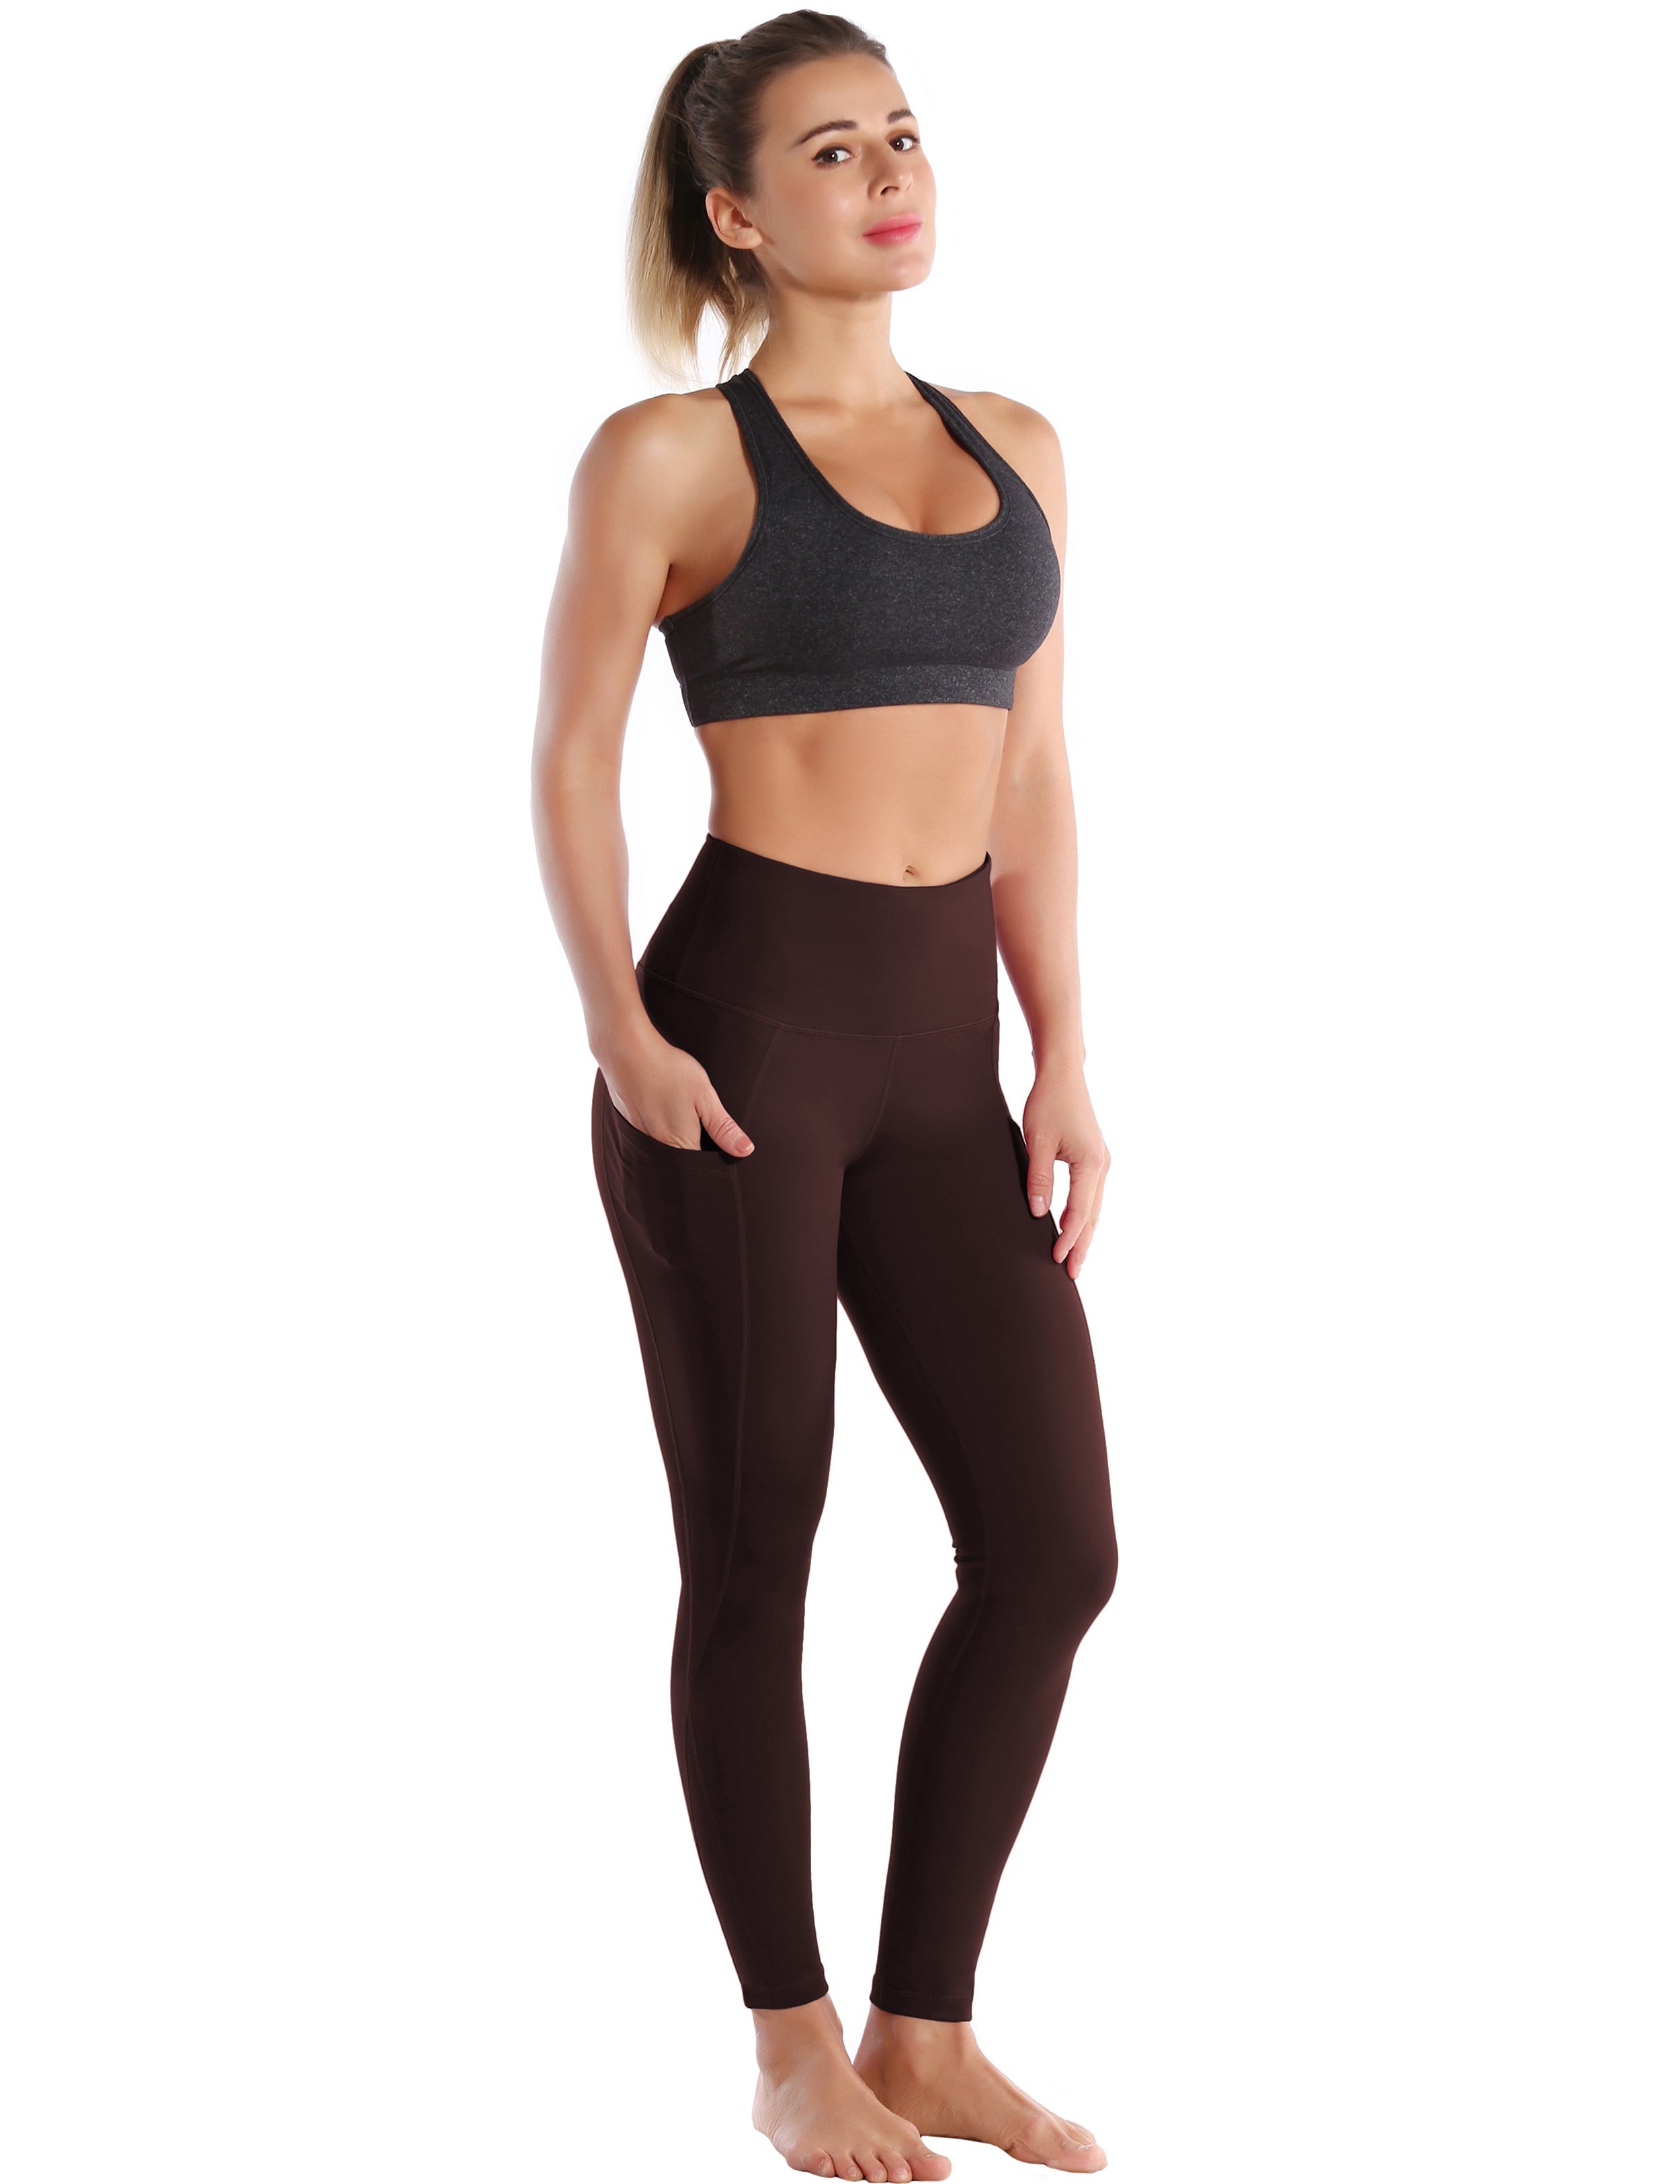 High Waist Side Pockets Plus Size Pants mahoganymaroon 75% Nylon, 25% Spandex Fabric doesn't attract lint easily 4-way stretch No see-through Moisture-wicking Tummy control Inner pocket